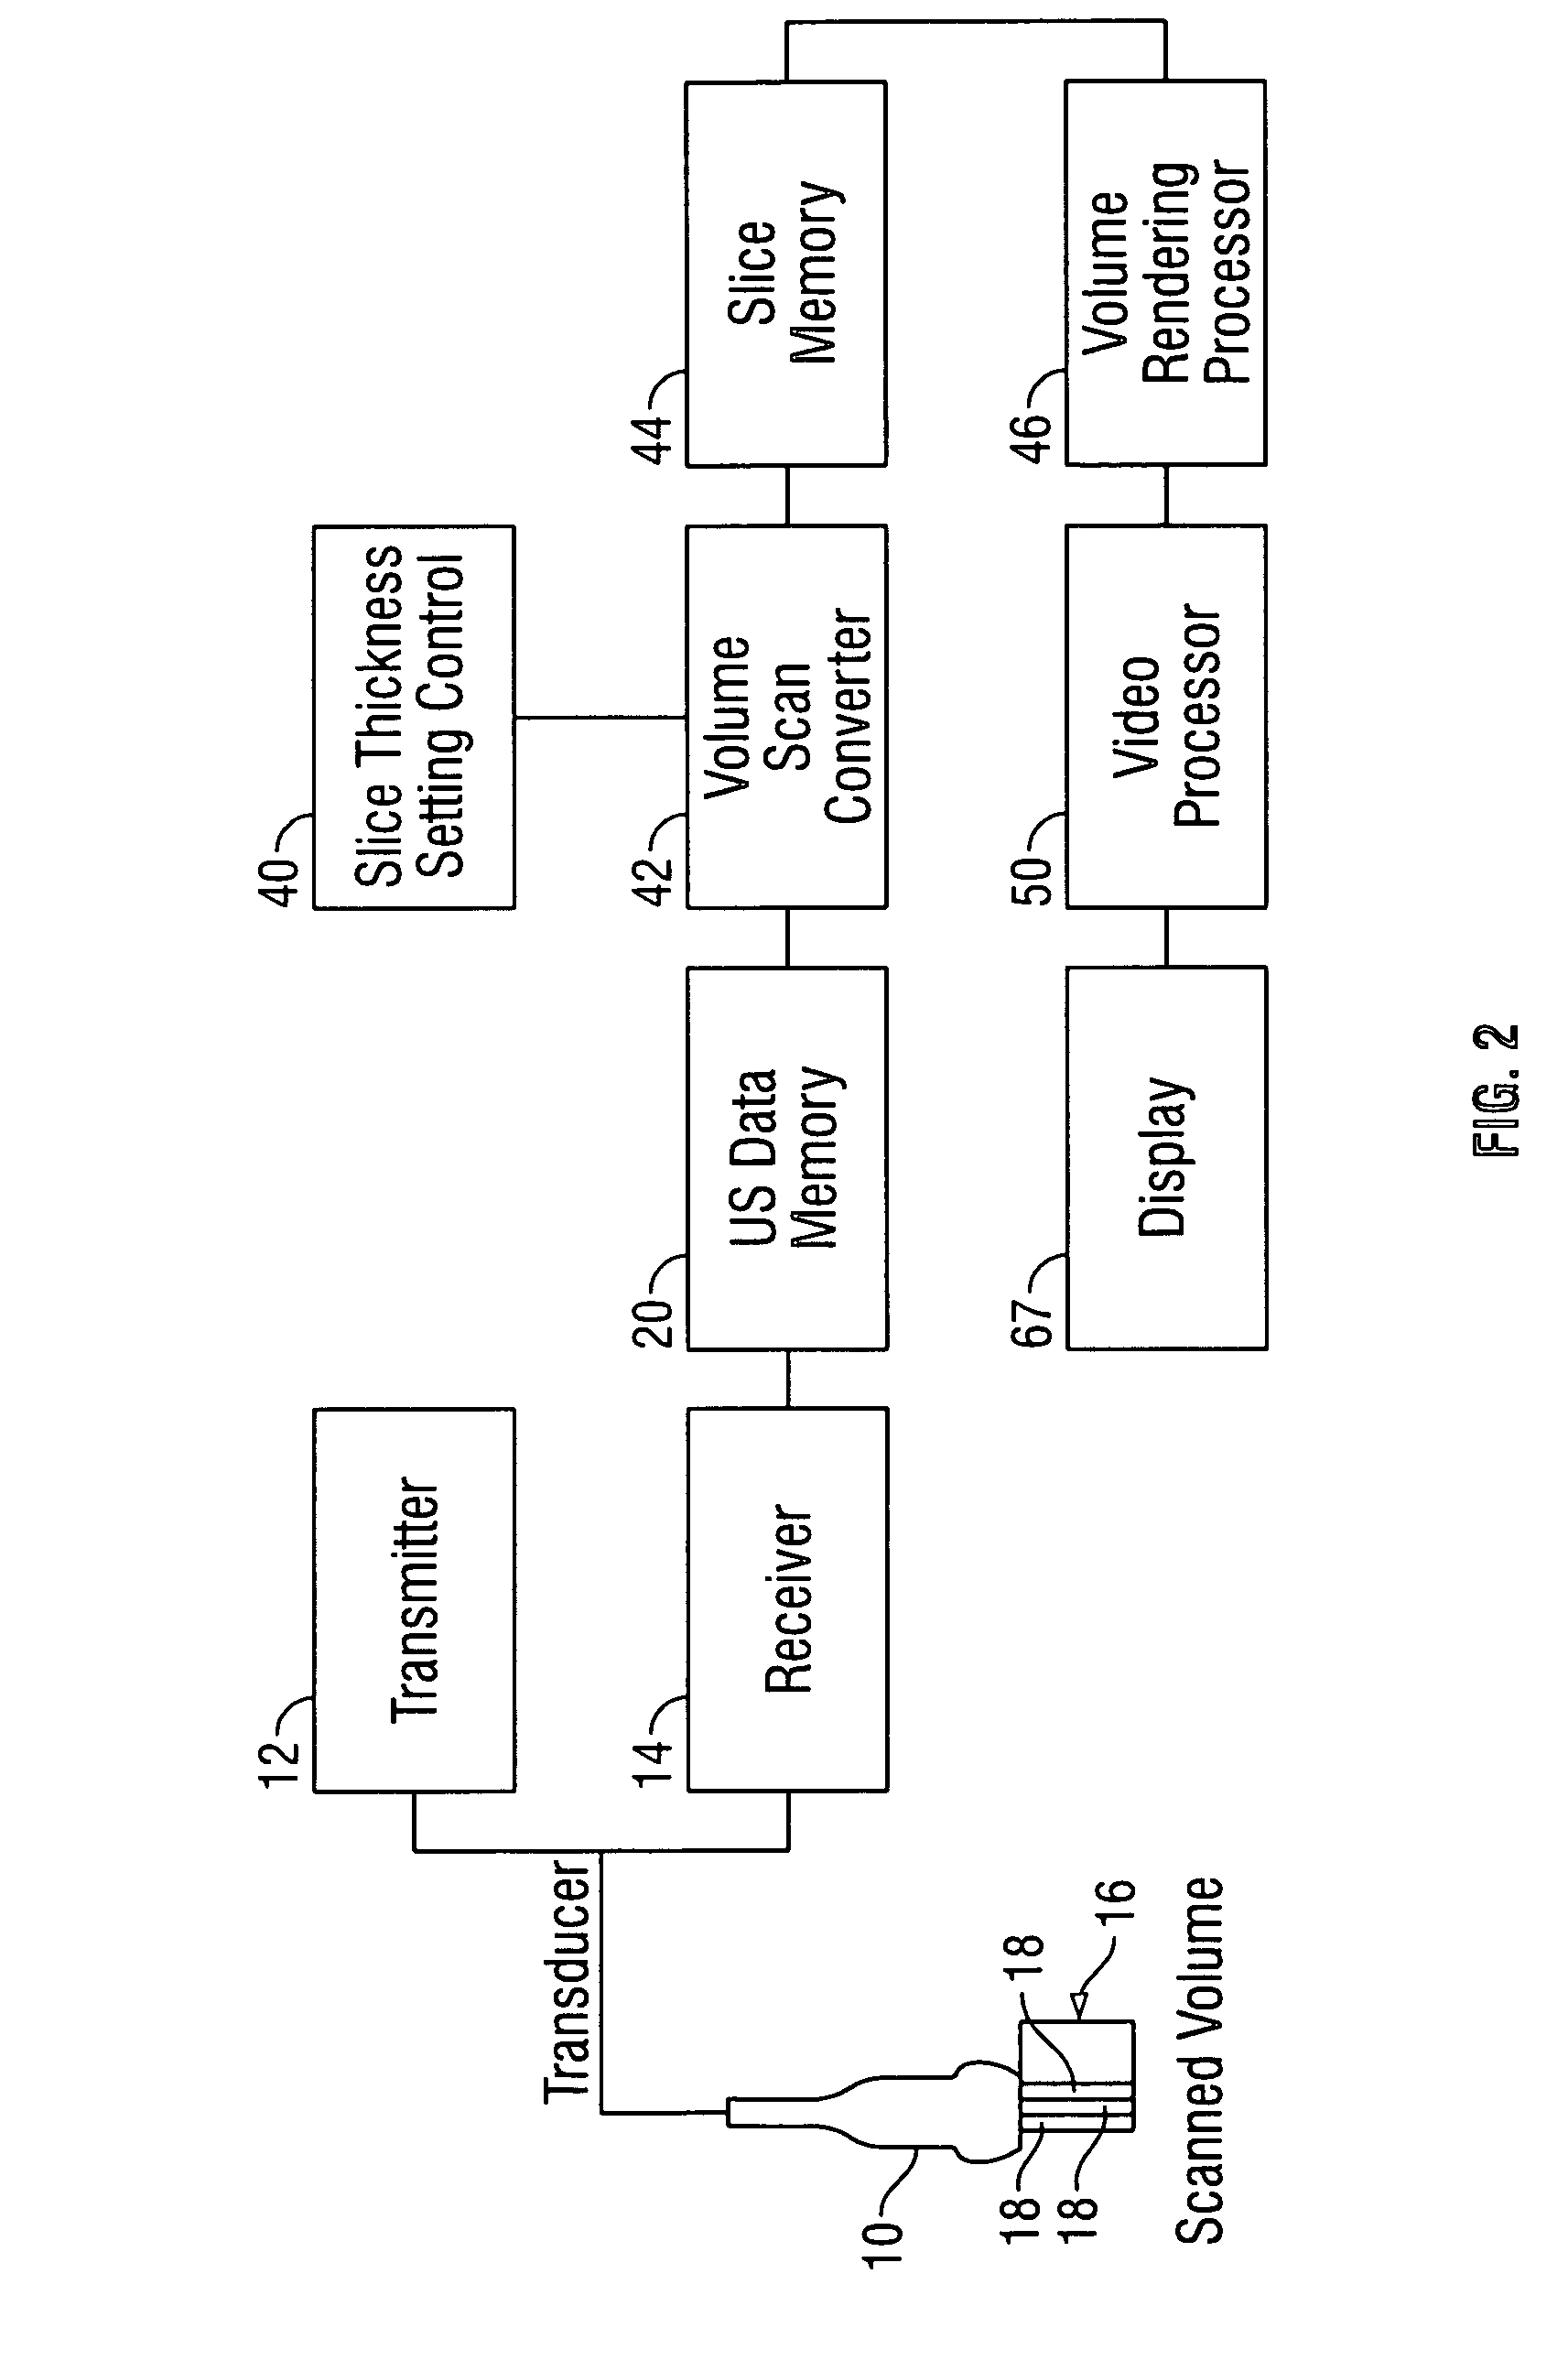 Method and apparatus for detecting anatomic structures